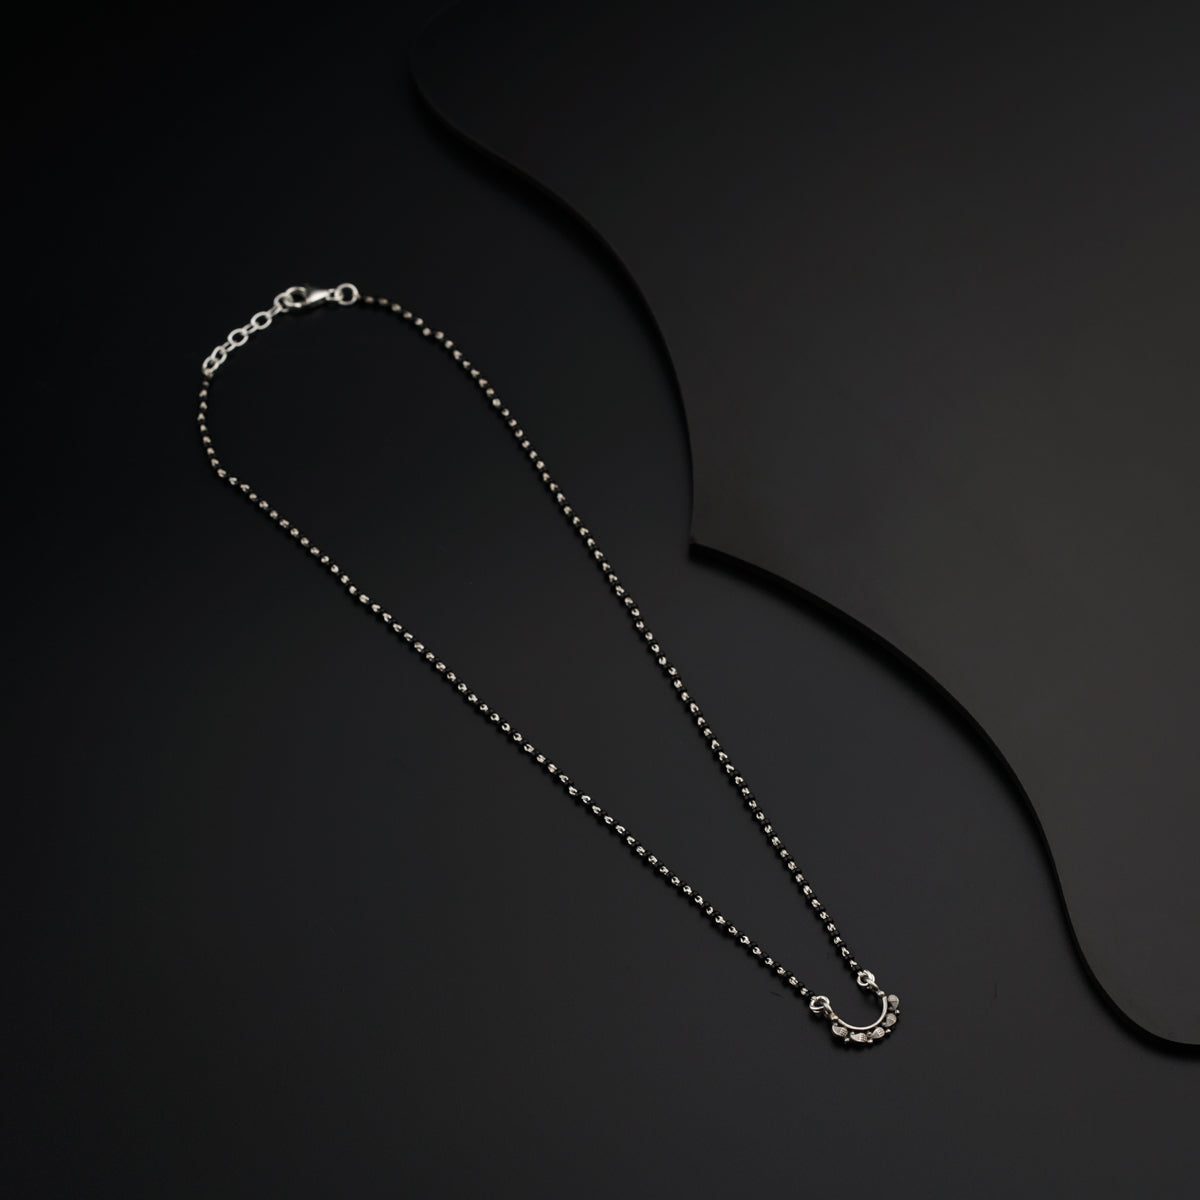 a silver necklace with a chain on a black background